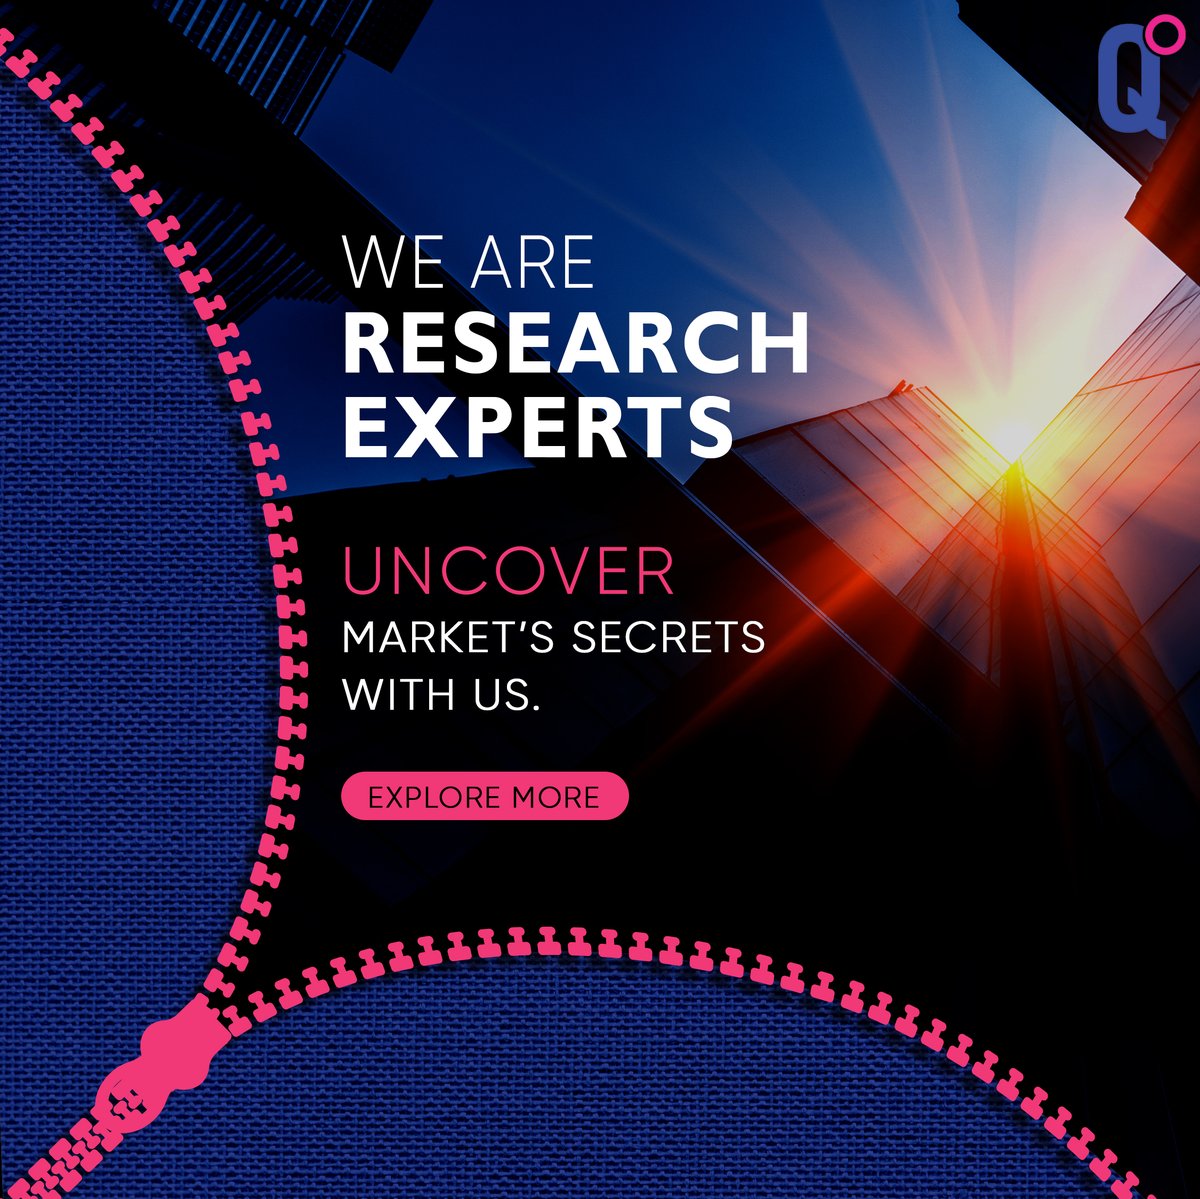 We are research experts who can help you uncover market's secrets and find new opportunities. Let us help you explore more with our market research services - qdegrees.com/services/marke…

#marketresearch #marketanalysis #statisticalanalysis #marketingconsulting #survey #QDegrees #CX